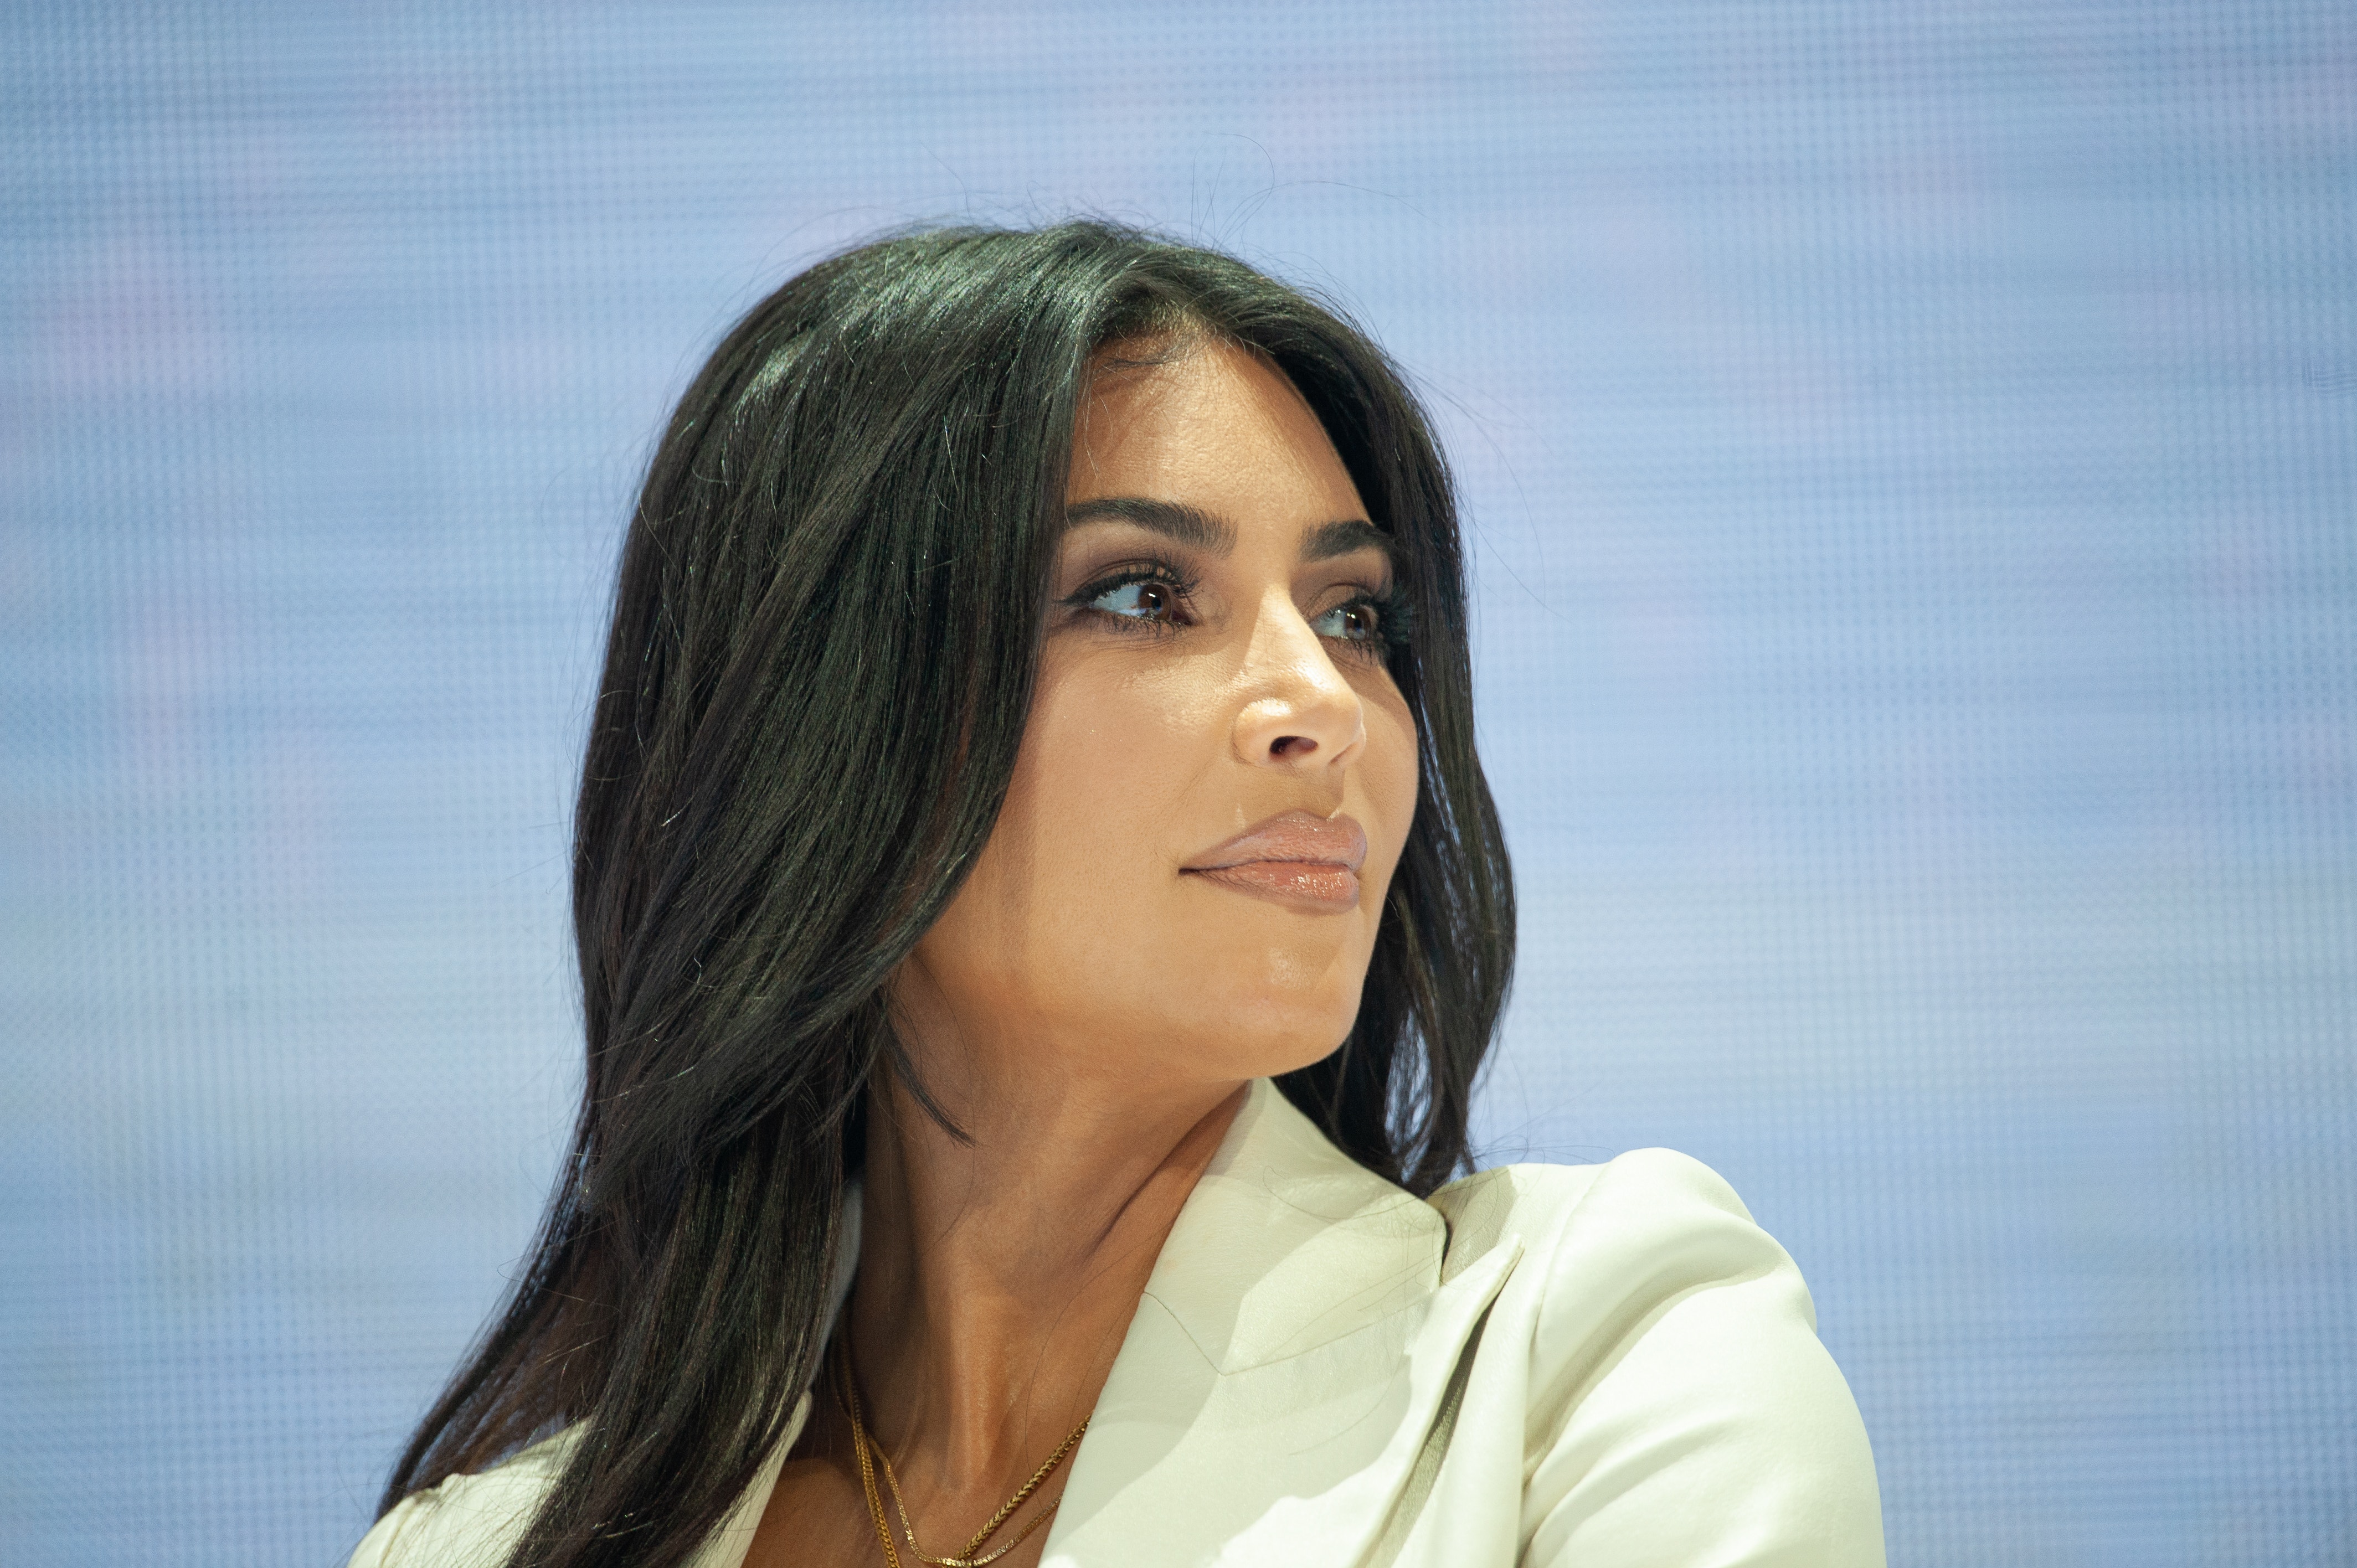 Kim Kardashian's Lawyers Say No Evidence She 'Pumped And Dumped' EthereumMax Tokens